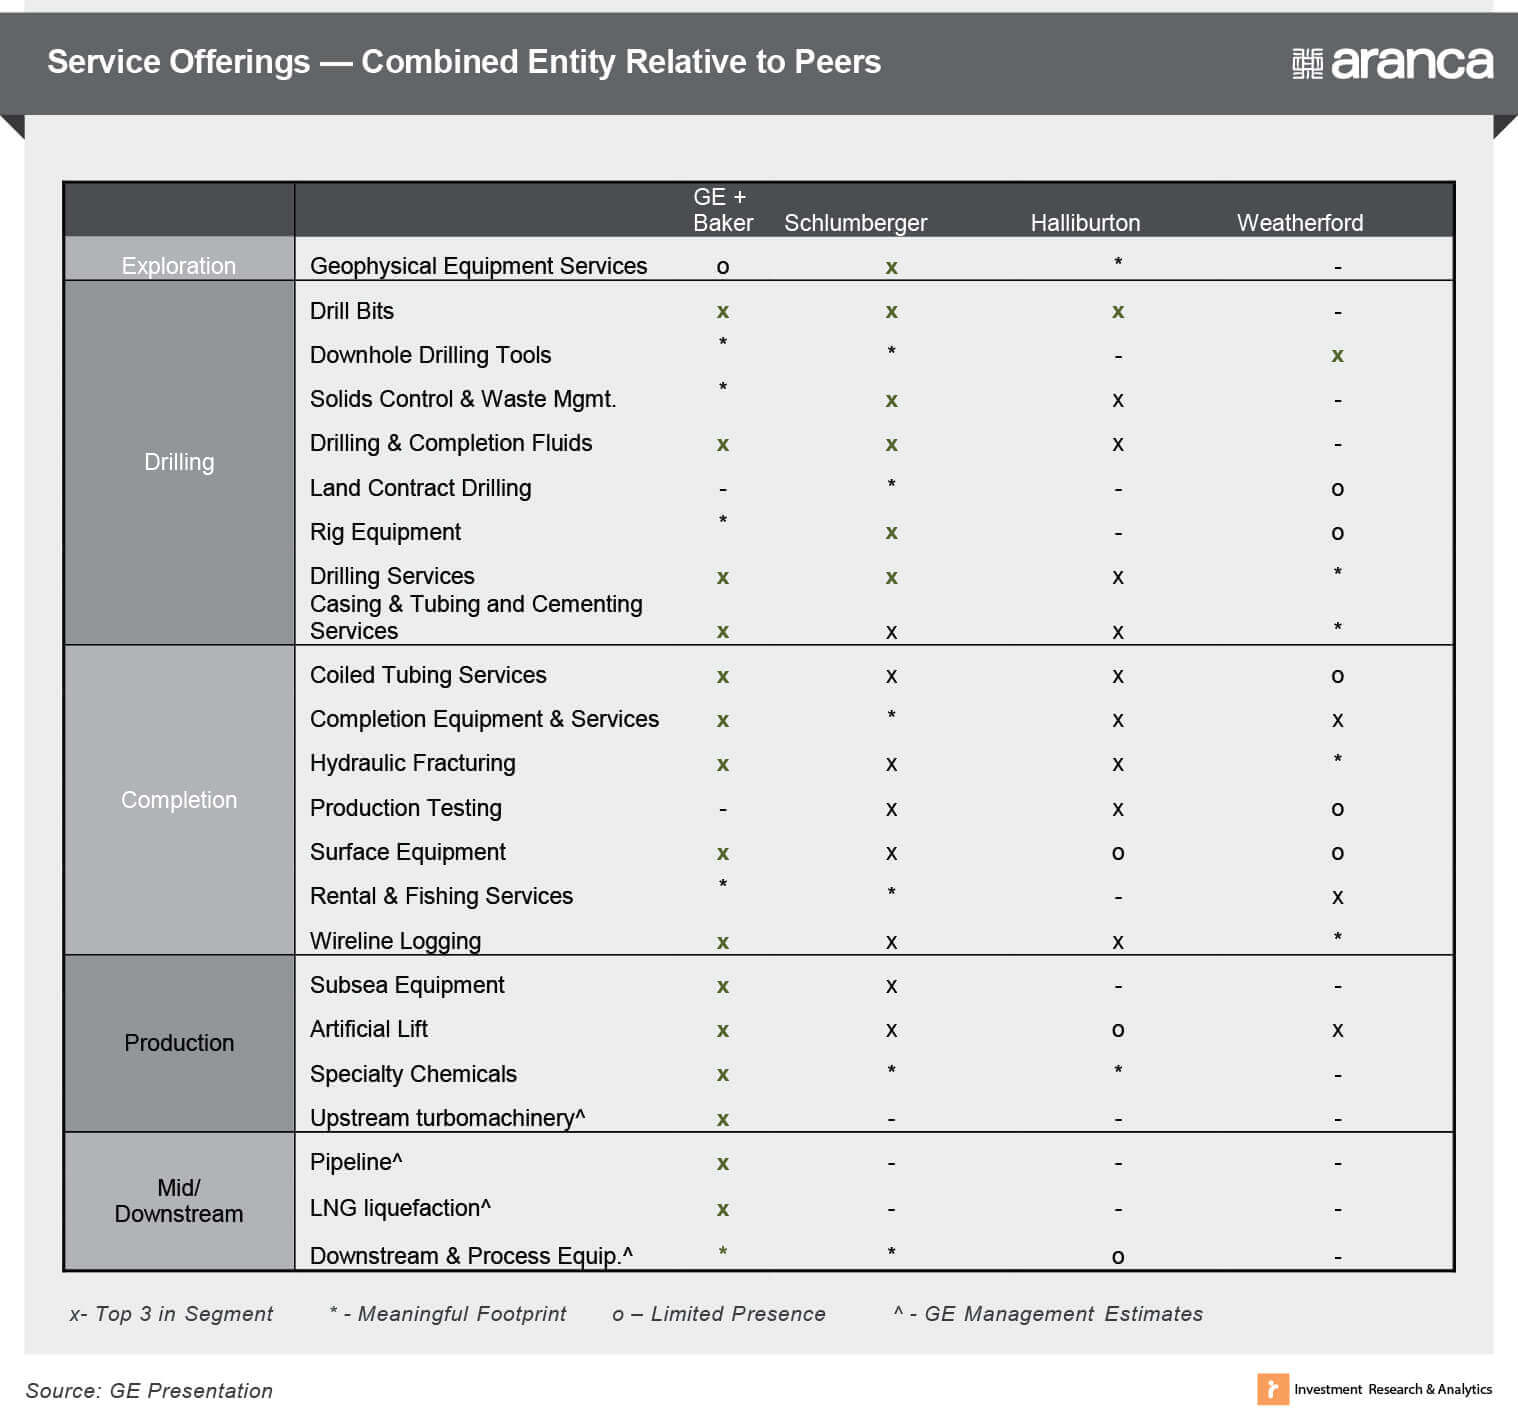 Service offerings - Combined Entity Relative to Peers